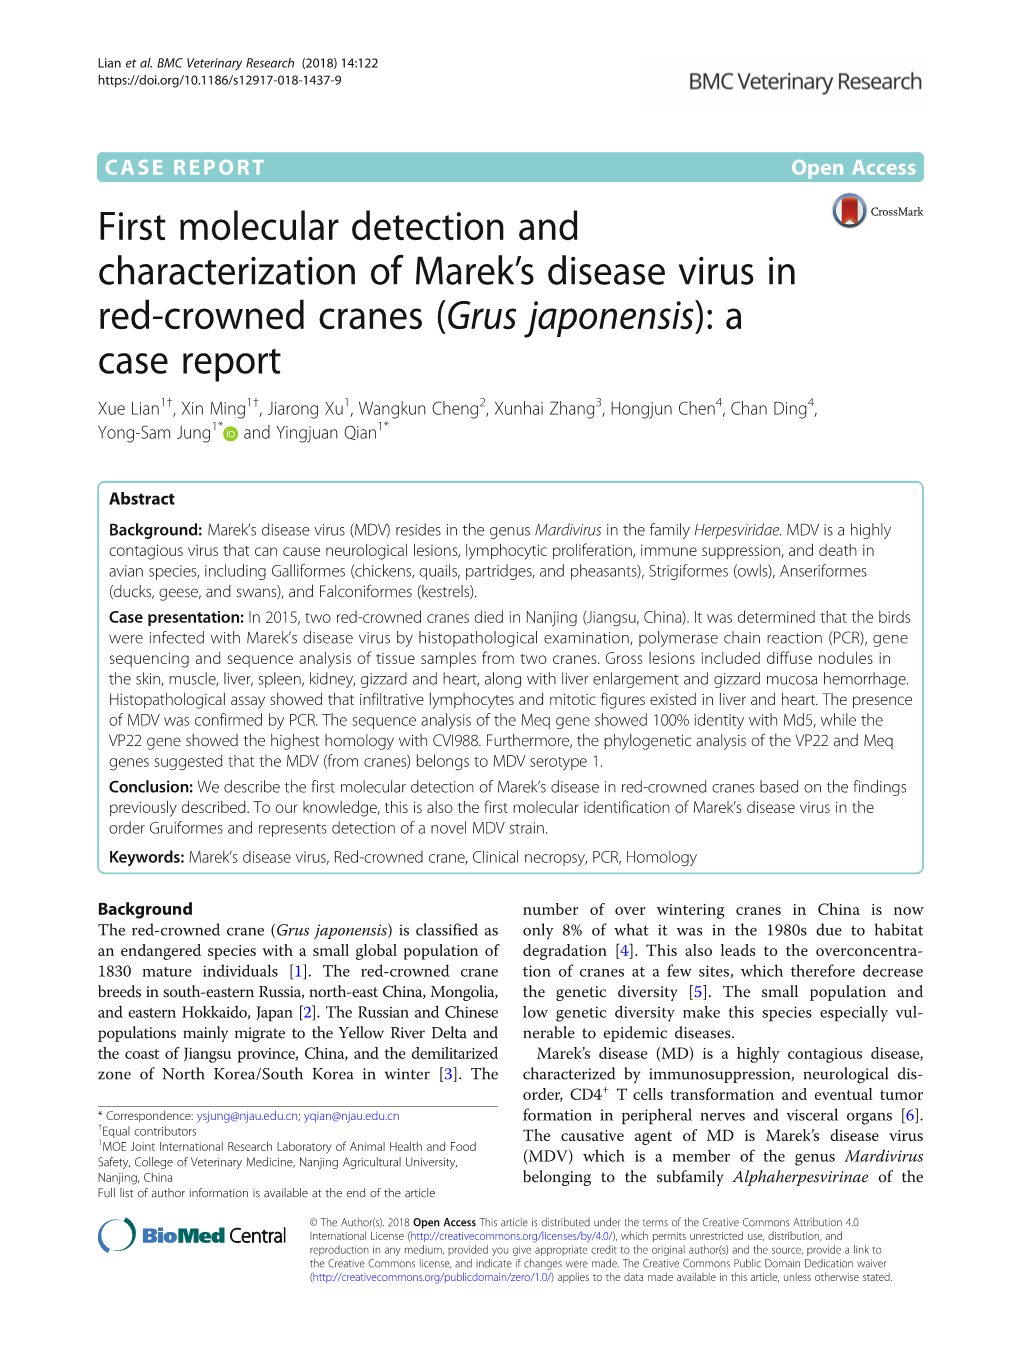 First Molecular Detection and Characterization of Marek's Disease Virus in Red-Crowned Cranes